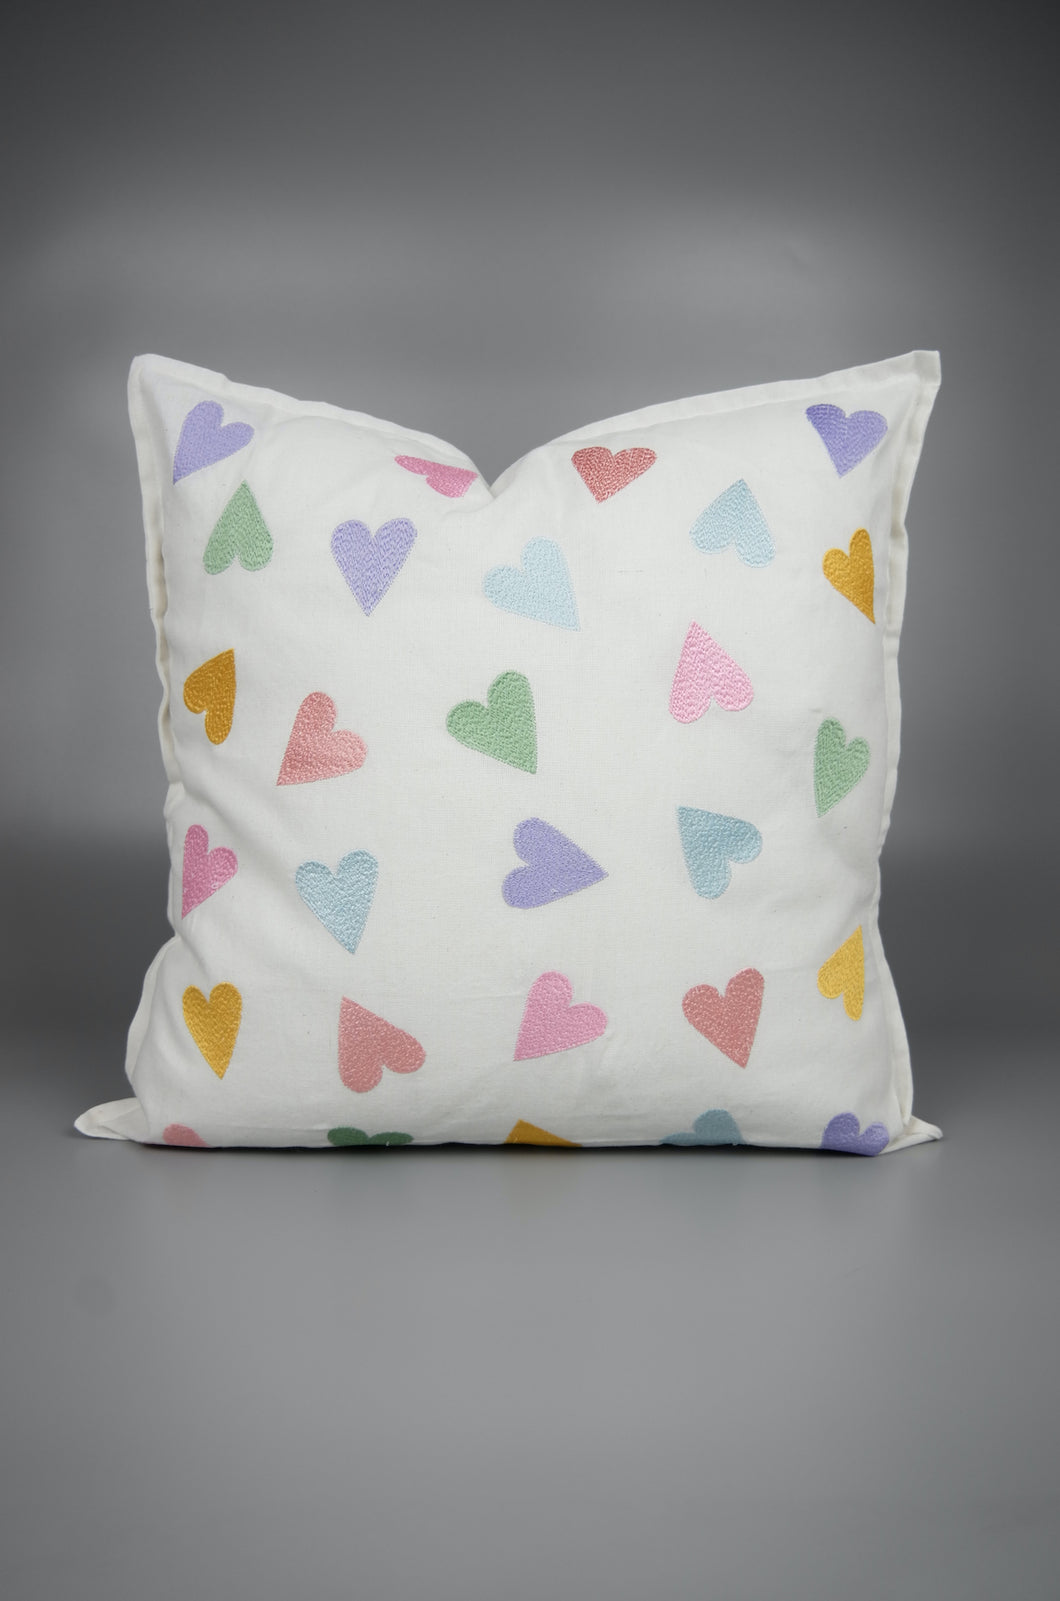 Pastel Hearts on Light Canvas Cushion Cover